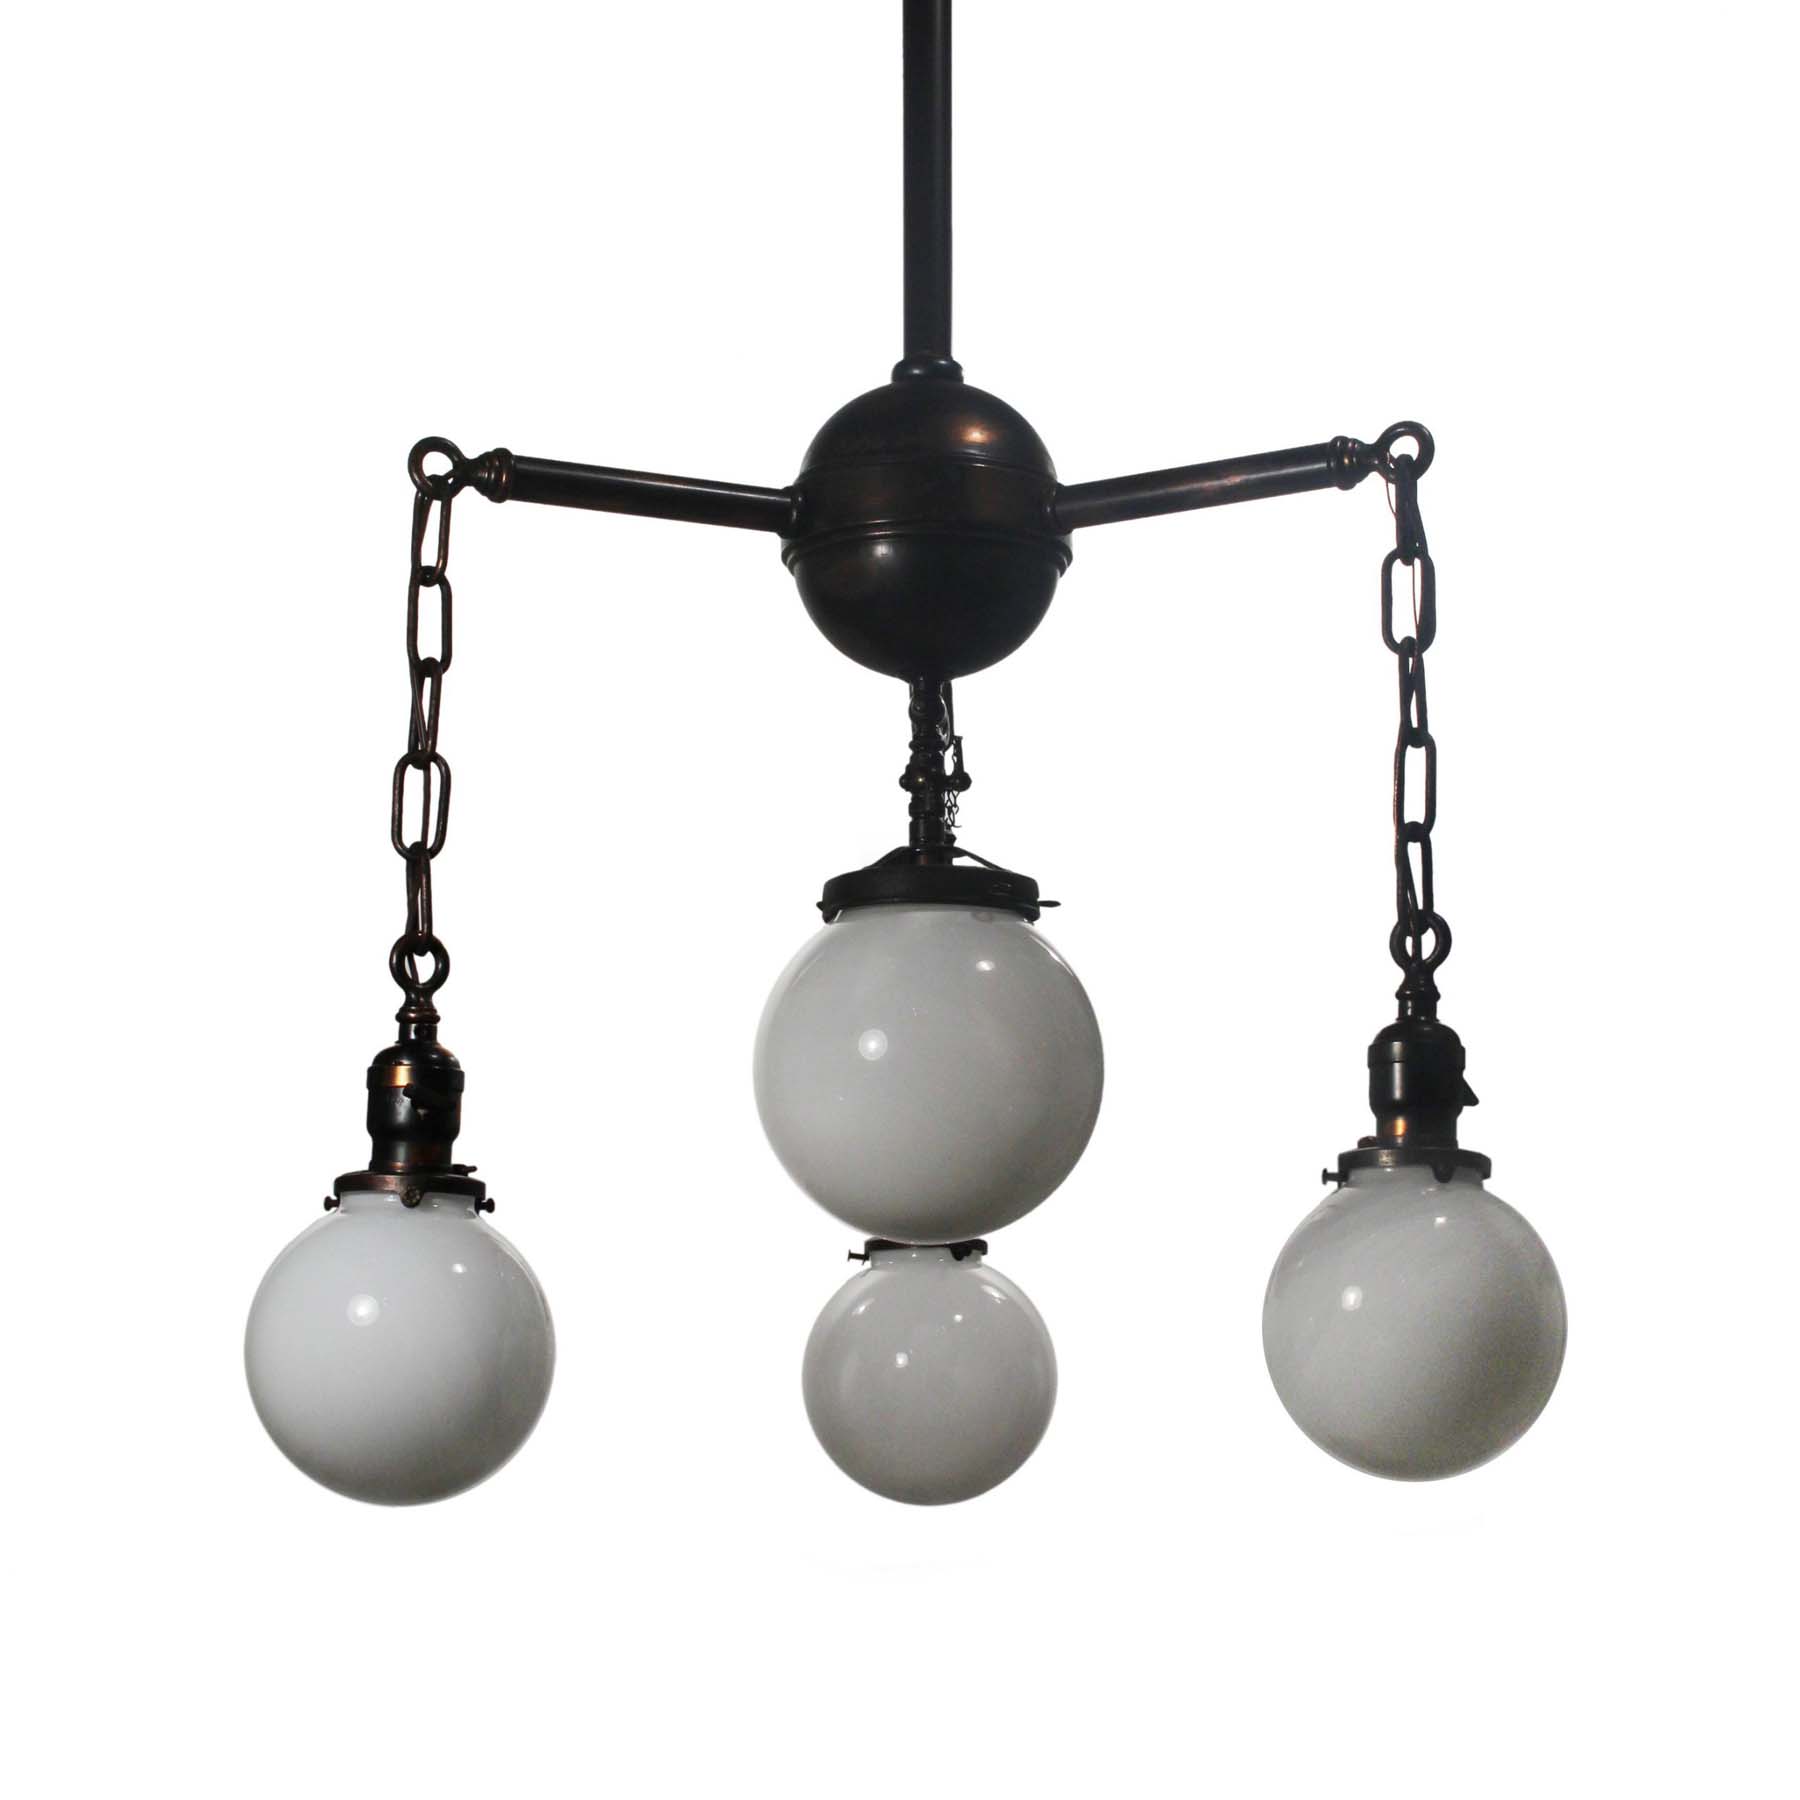 SOLD Antique Four-Light Chandeliers with Glass Globes, Early 1900’s-67231